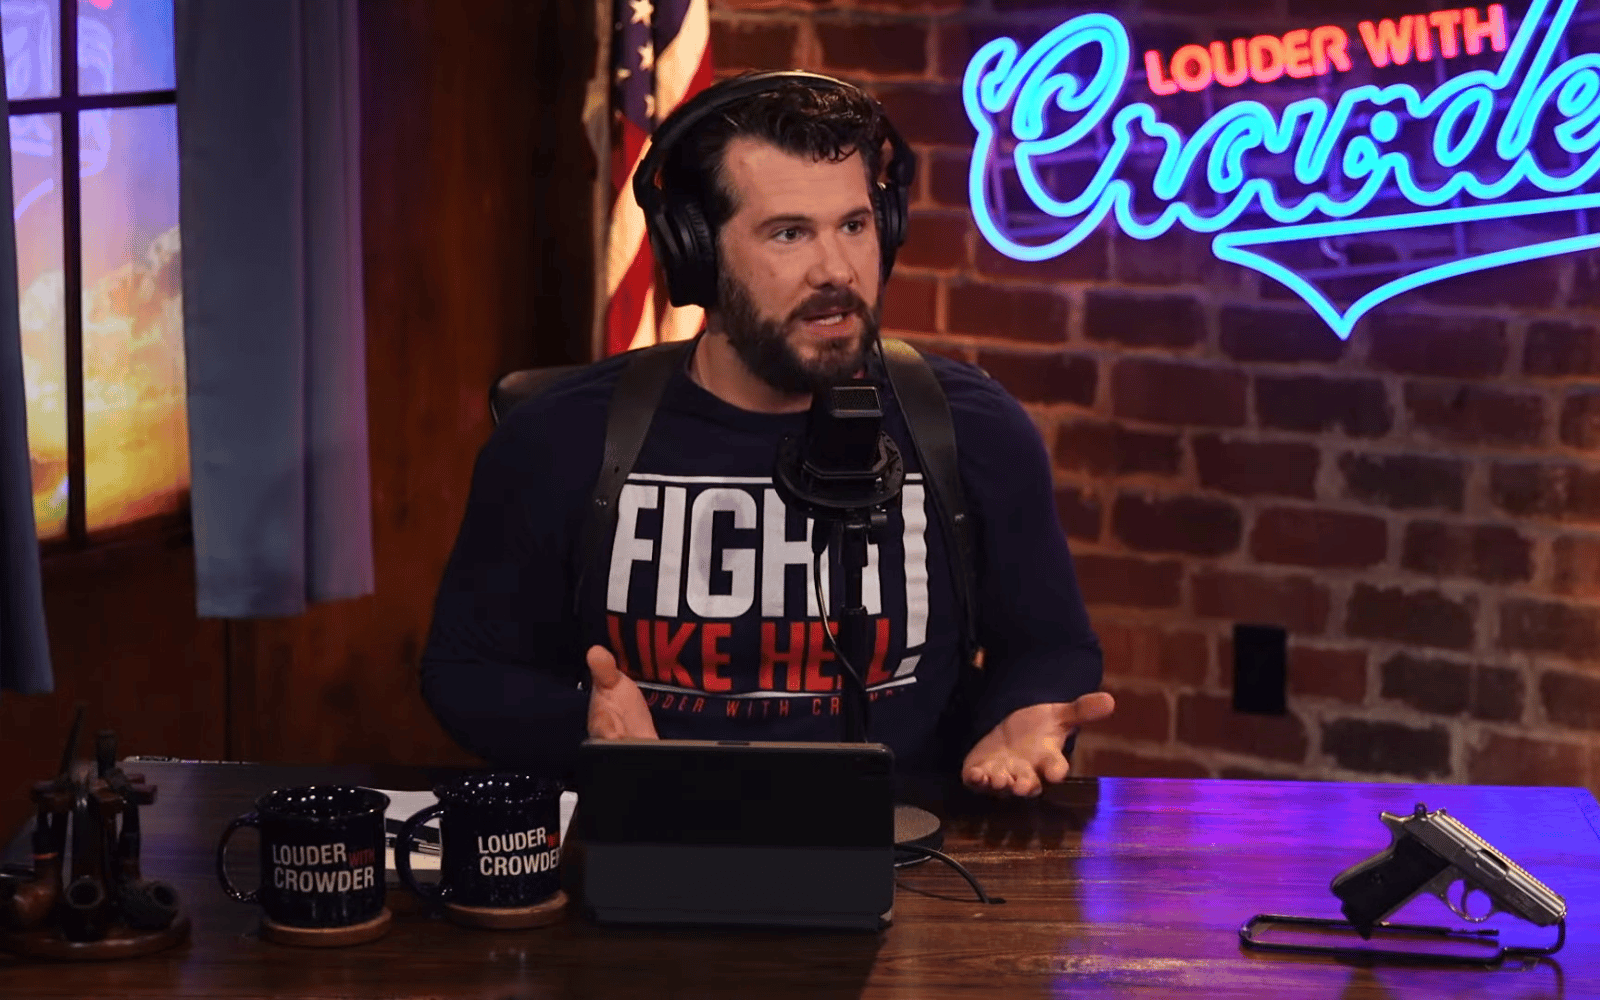 Who is far-right YouTuber Steven Crowder and what are his anti-LGBTQ+, anti-feminist views?